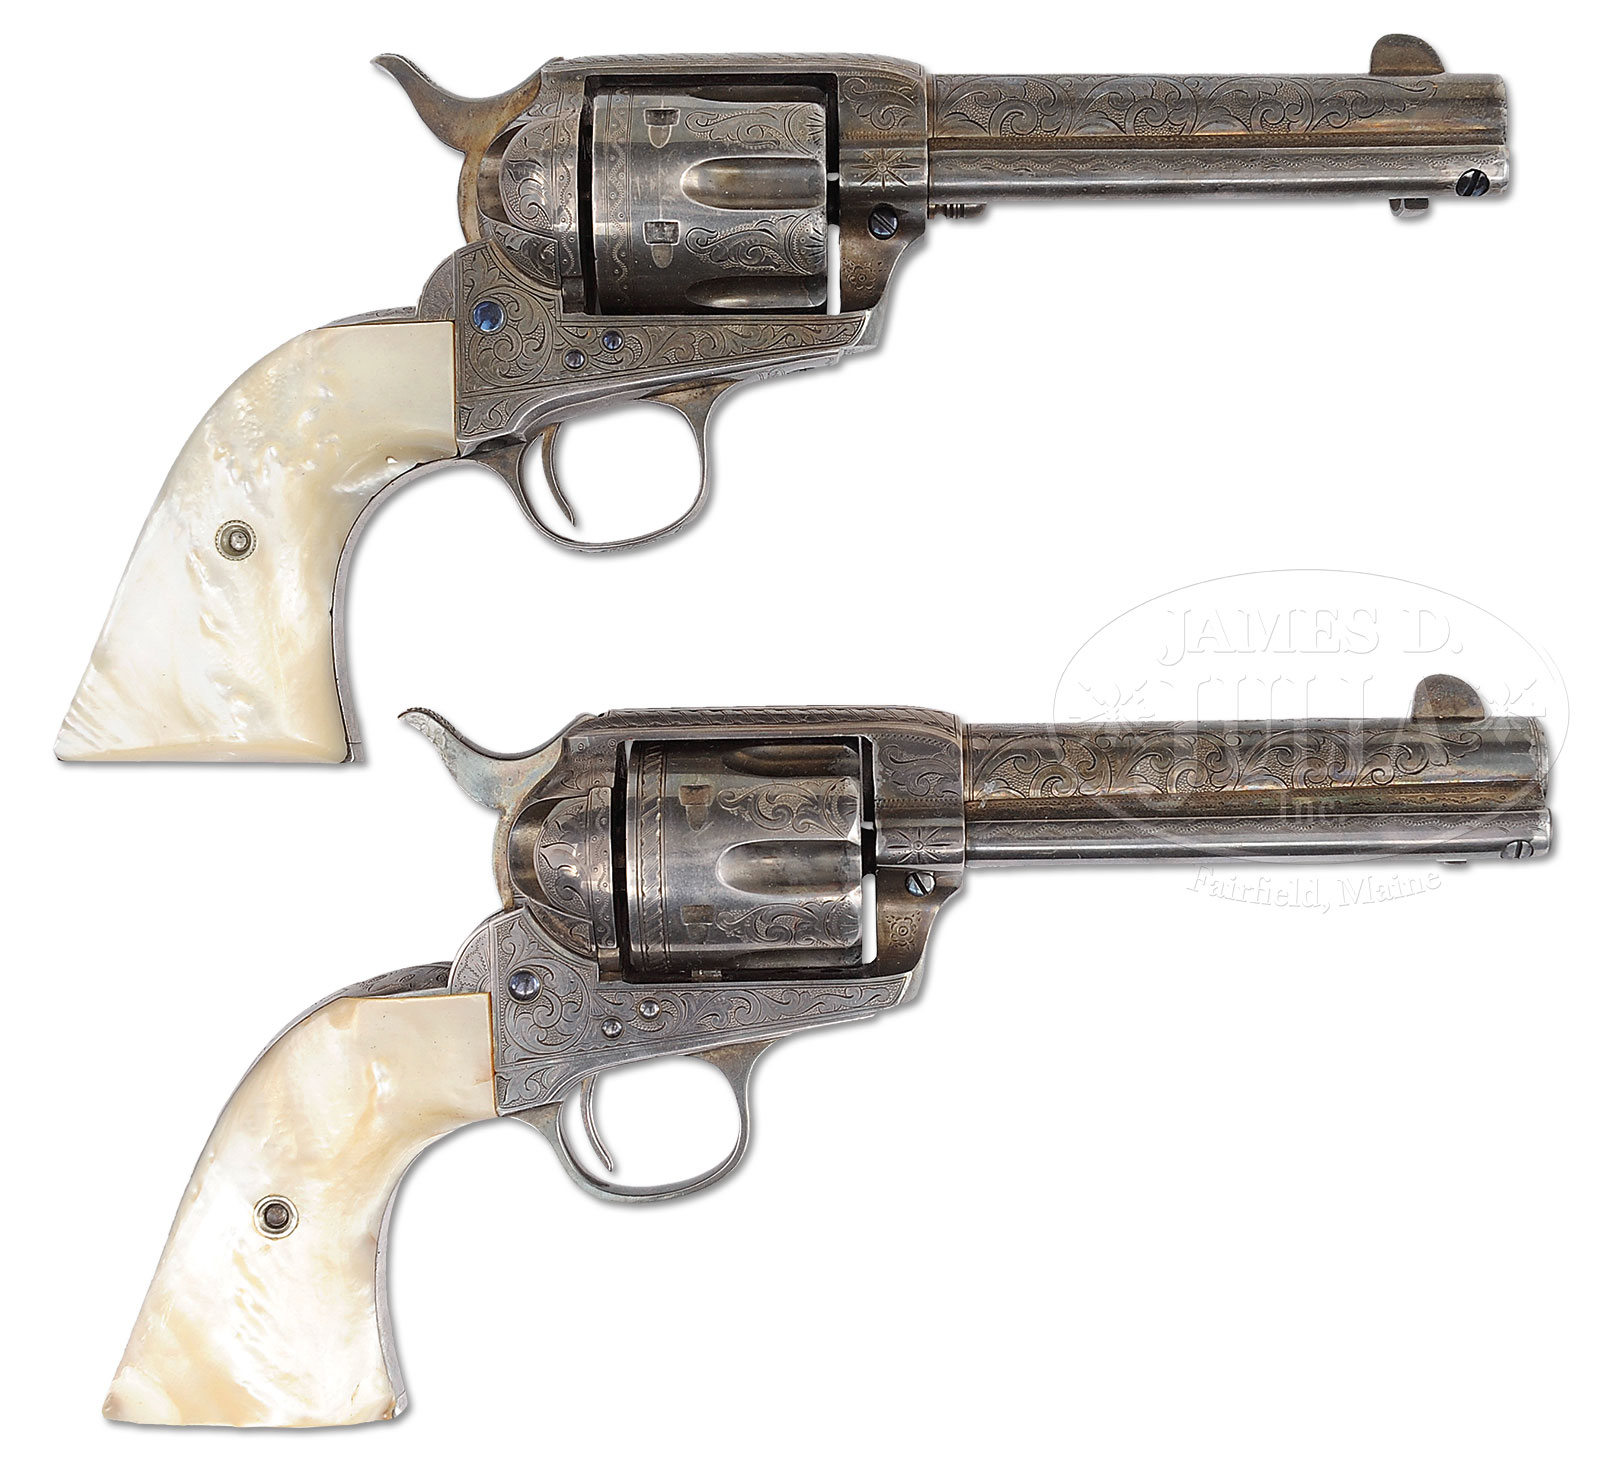 PAIR OF EXTRAORDINARILY RARE & DESIRABLE FULLY FACTORY LETTERED ENGRAVED & INSCRIBED SILVER PLATED COLT SINGLE ACTION ARMY REVOLVERS.